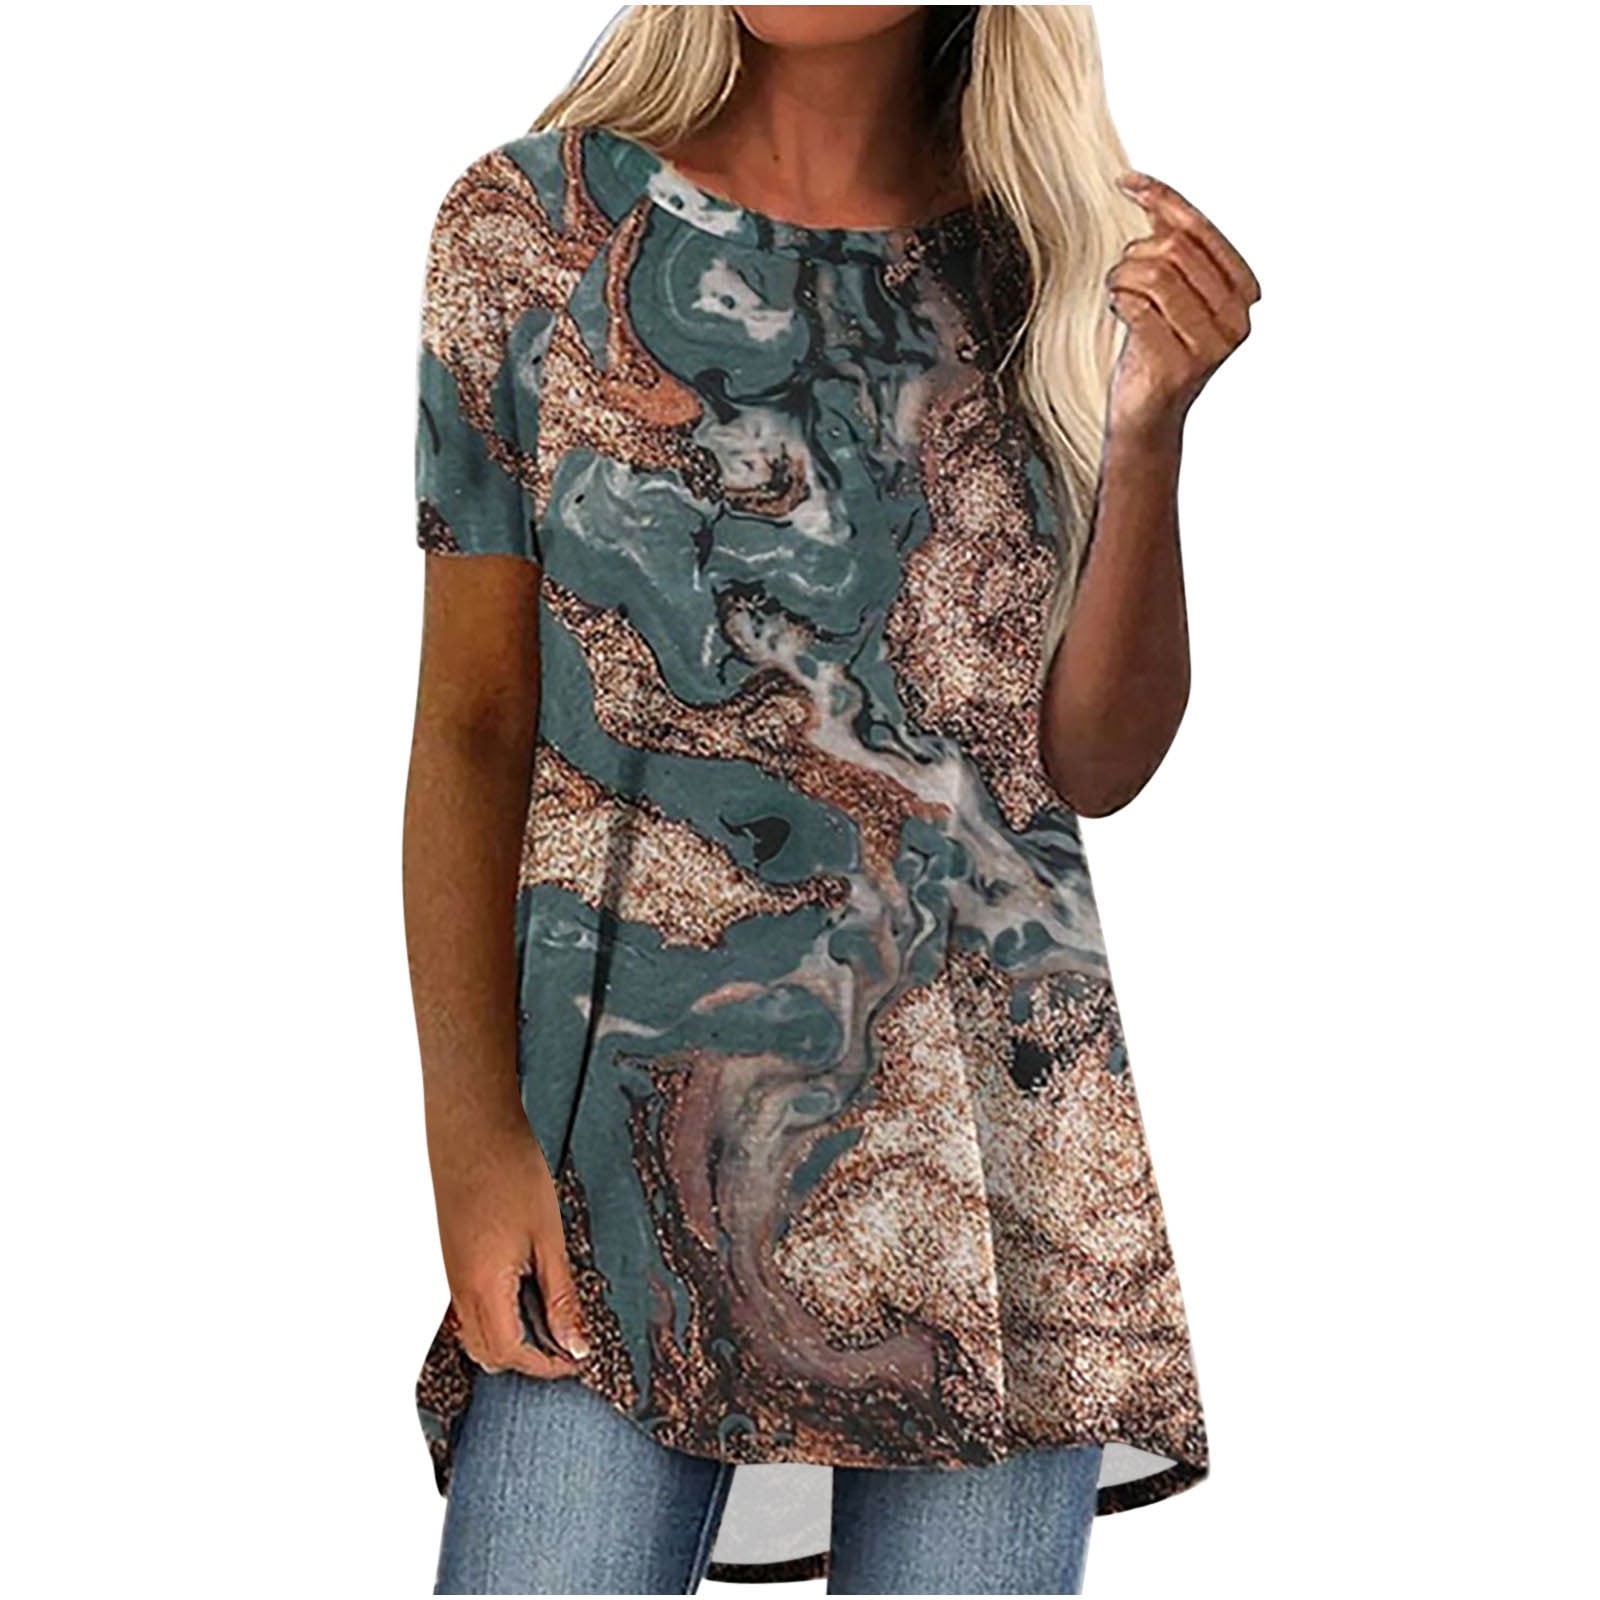 Hfyihgf Tunics for Women to Wear with Leggings Summer Short Sleeve Flowy T  Shirts Casual Trendy Landscape Print Pattern Tops(Green,L) 